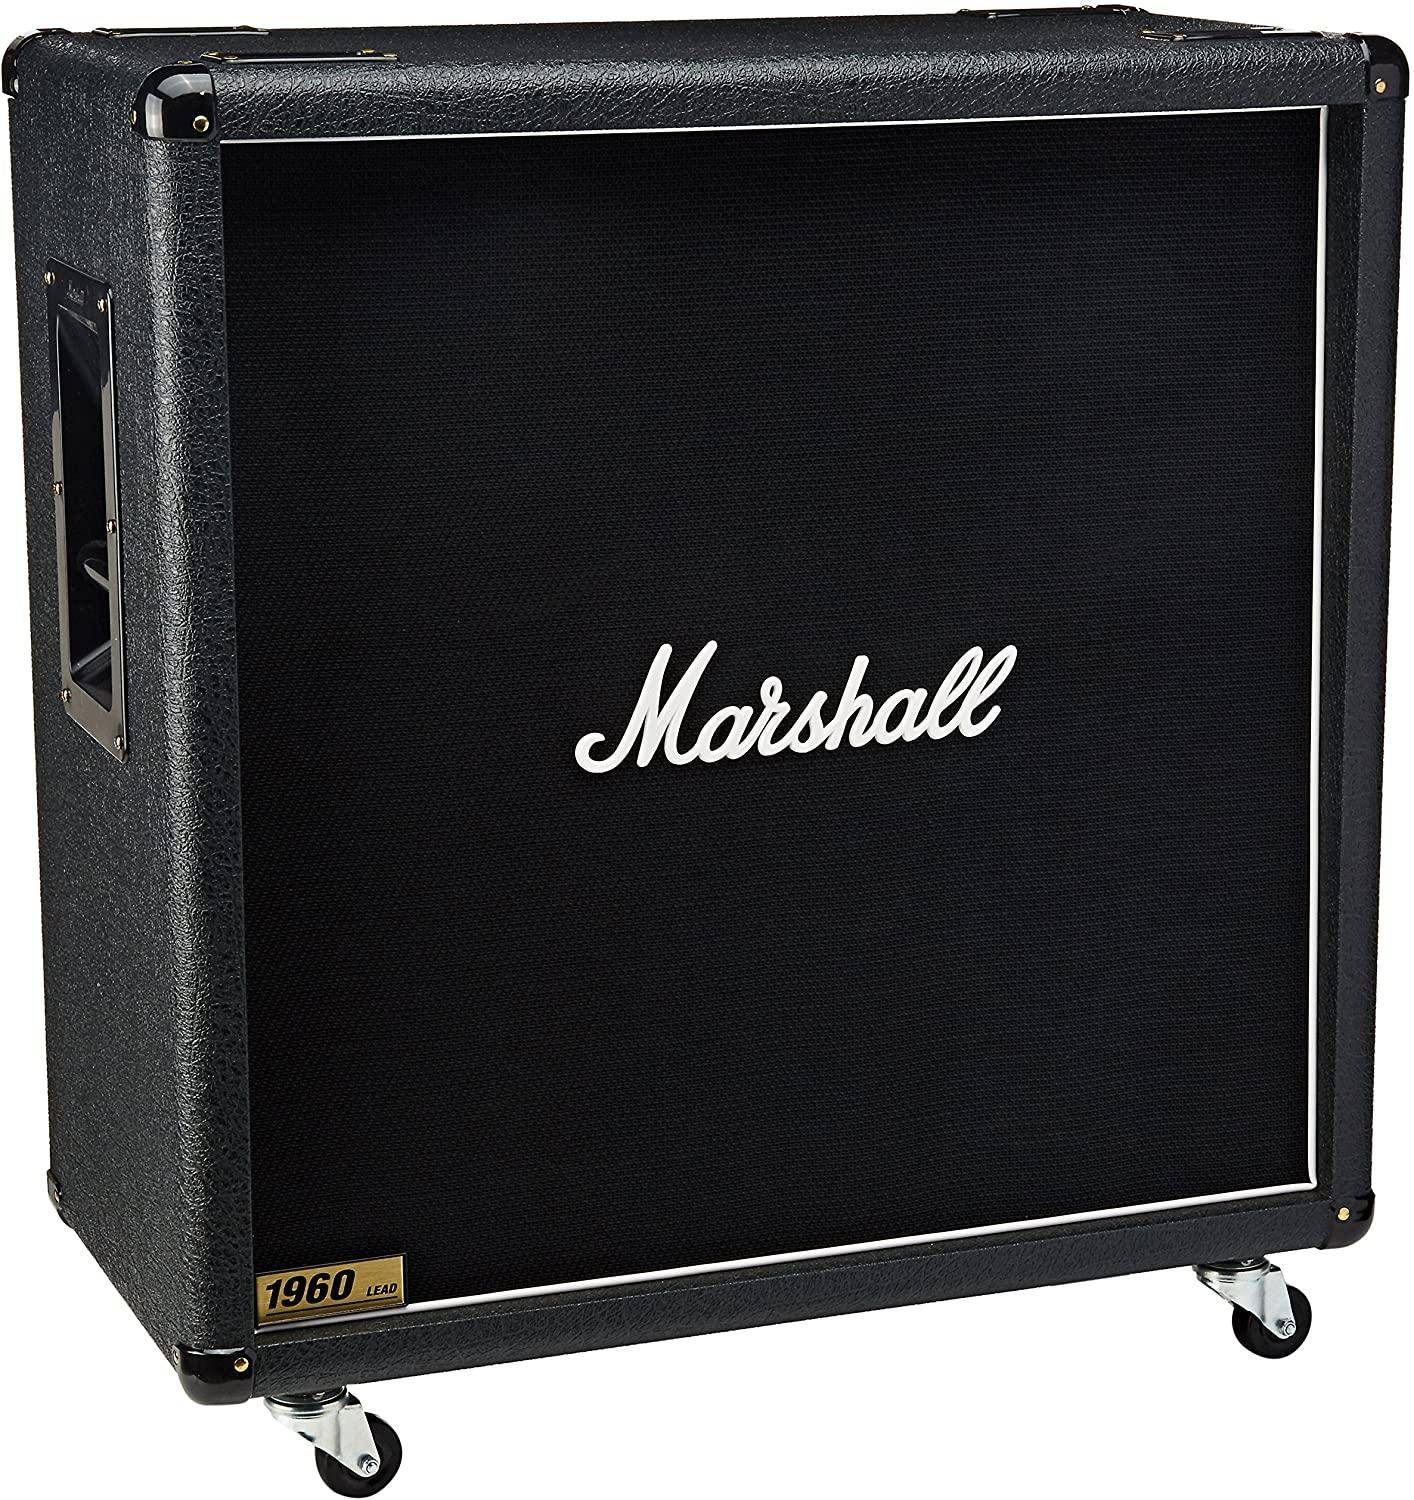 Marshall 1960B 300W 4x12 Guitar Extension Cabinet zoom image